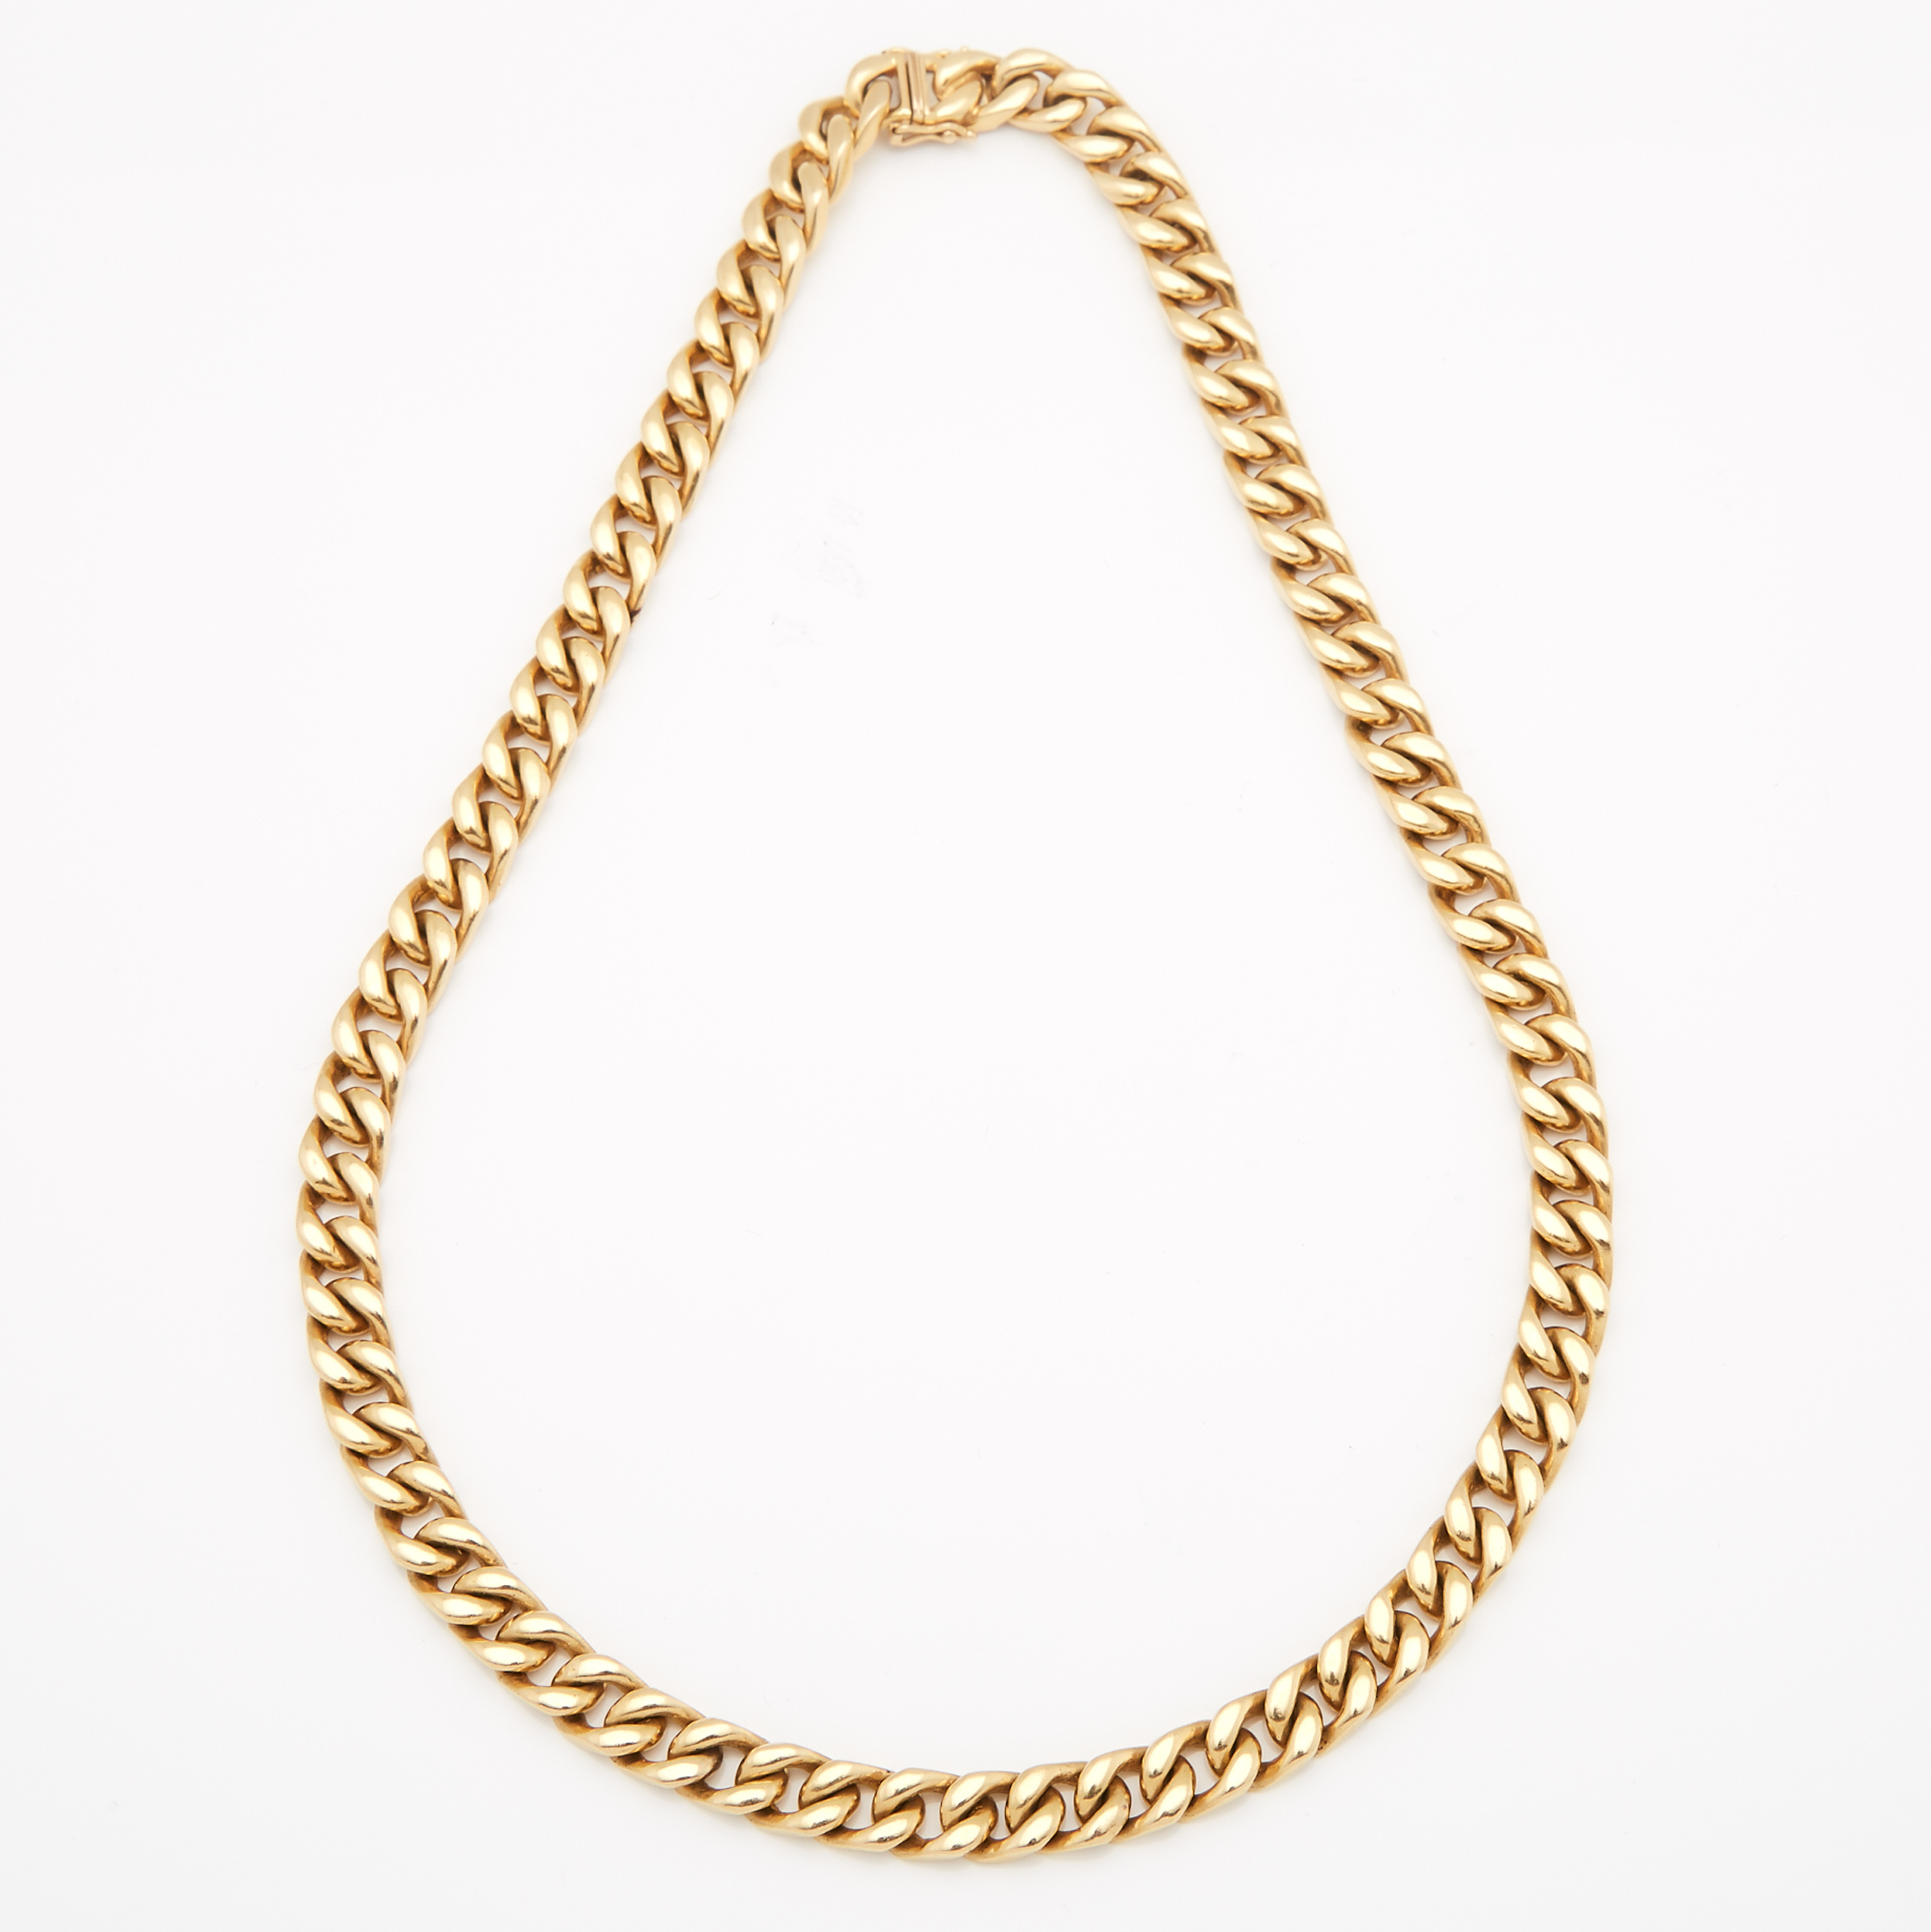 European Jewellers 18k Yellow Gold Curb Link Chain